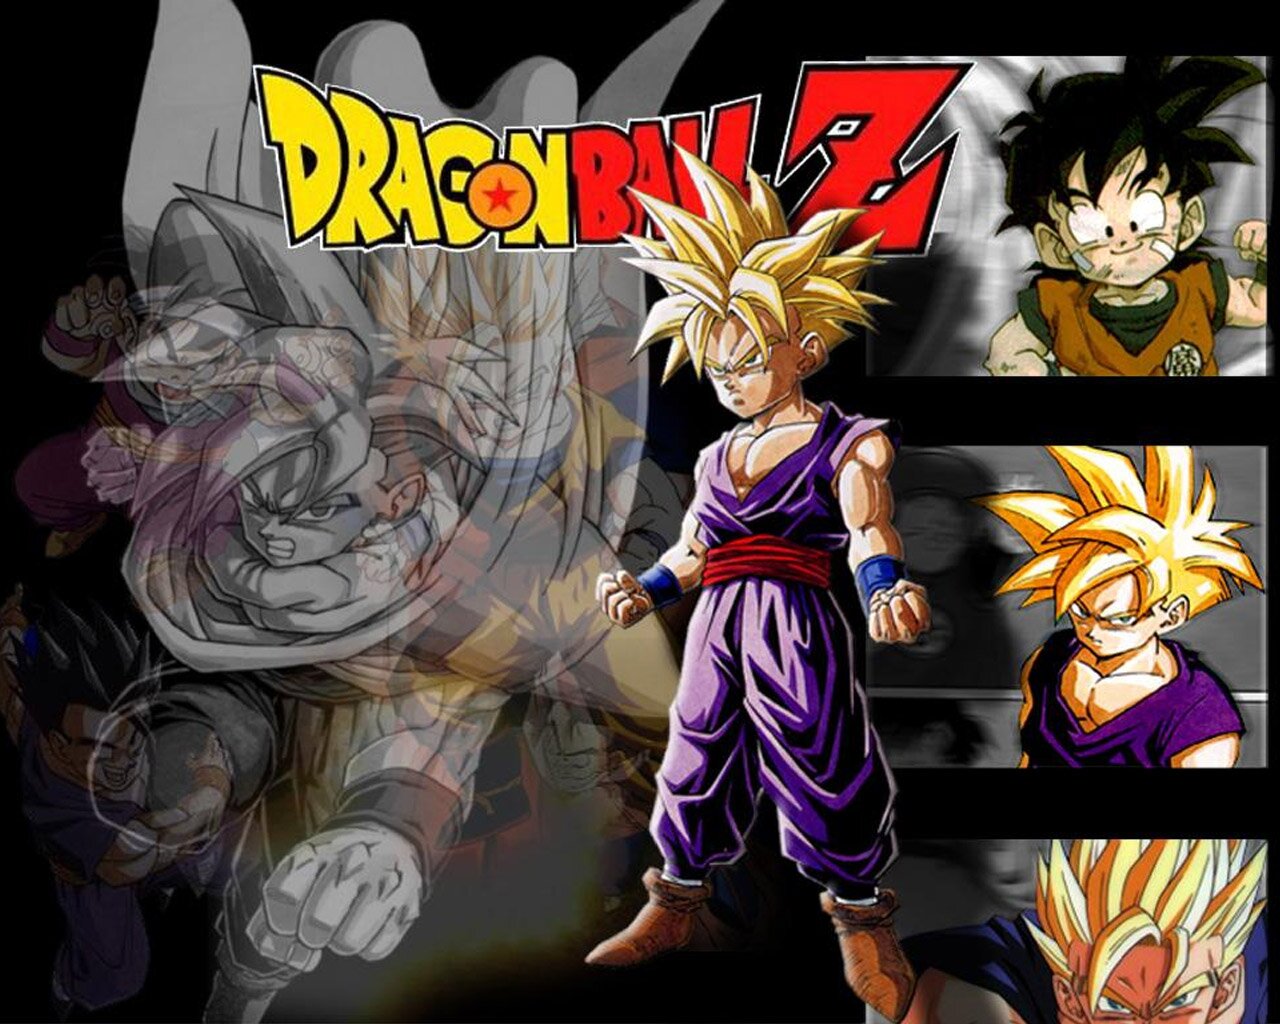 You are viewing the Dragonball Z wallpaper named Gohan.